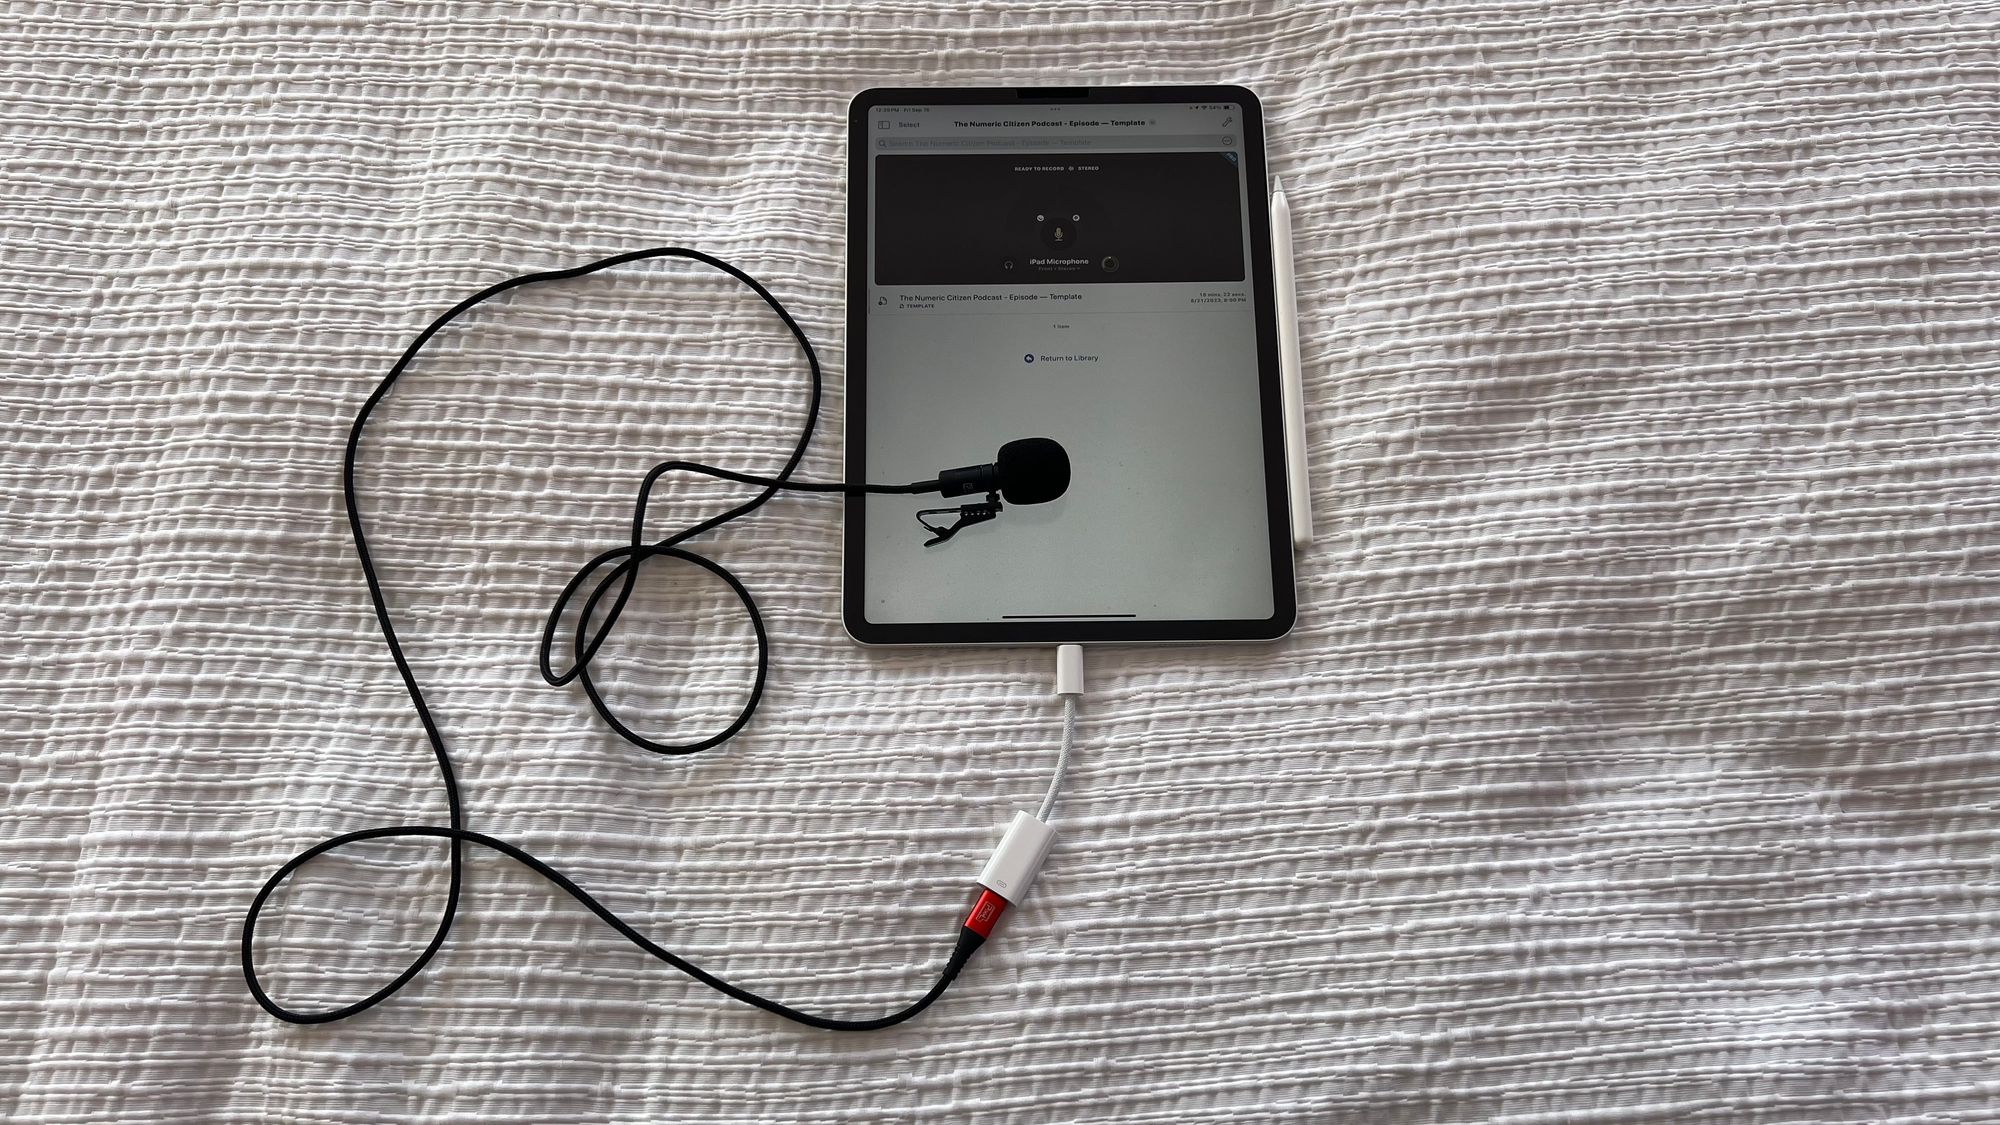 My Lavalier microphone is connected to the new USB-C to the Lightning adaptor on my iPad Pro and Ferrite. Doesn’t work. 😑